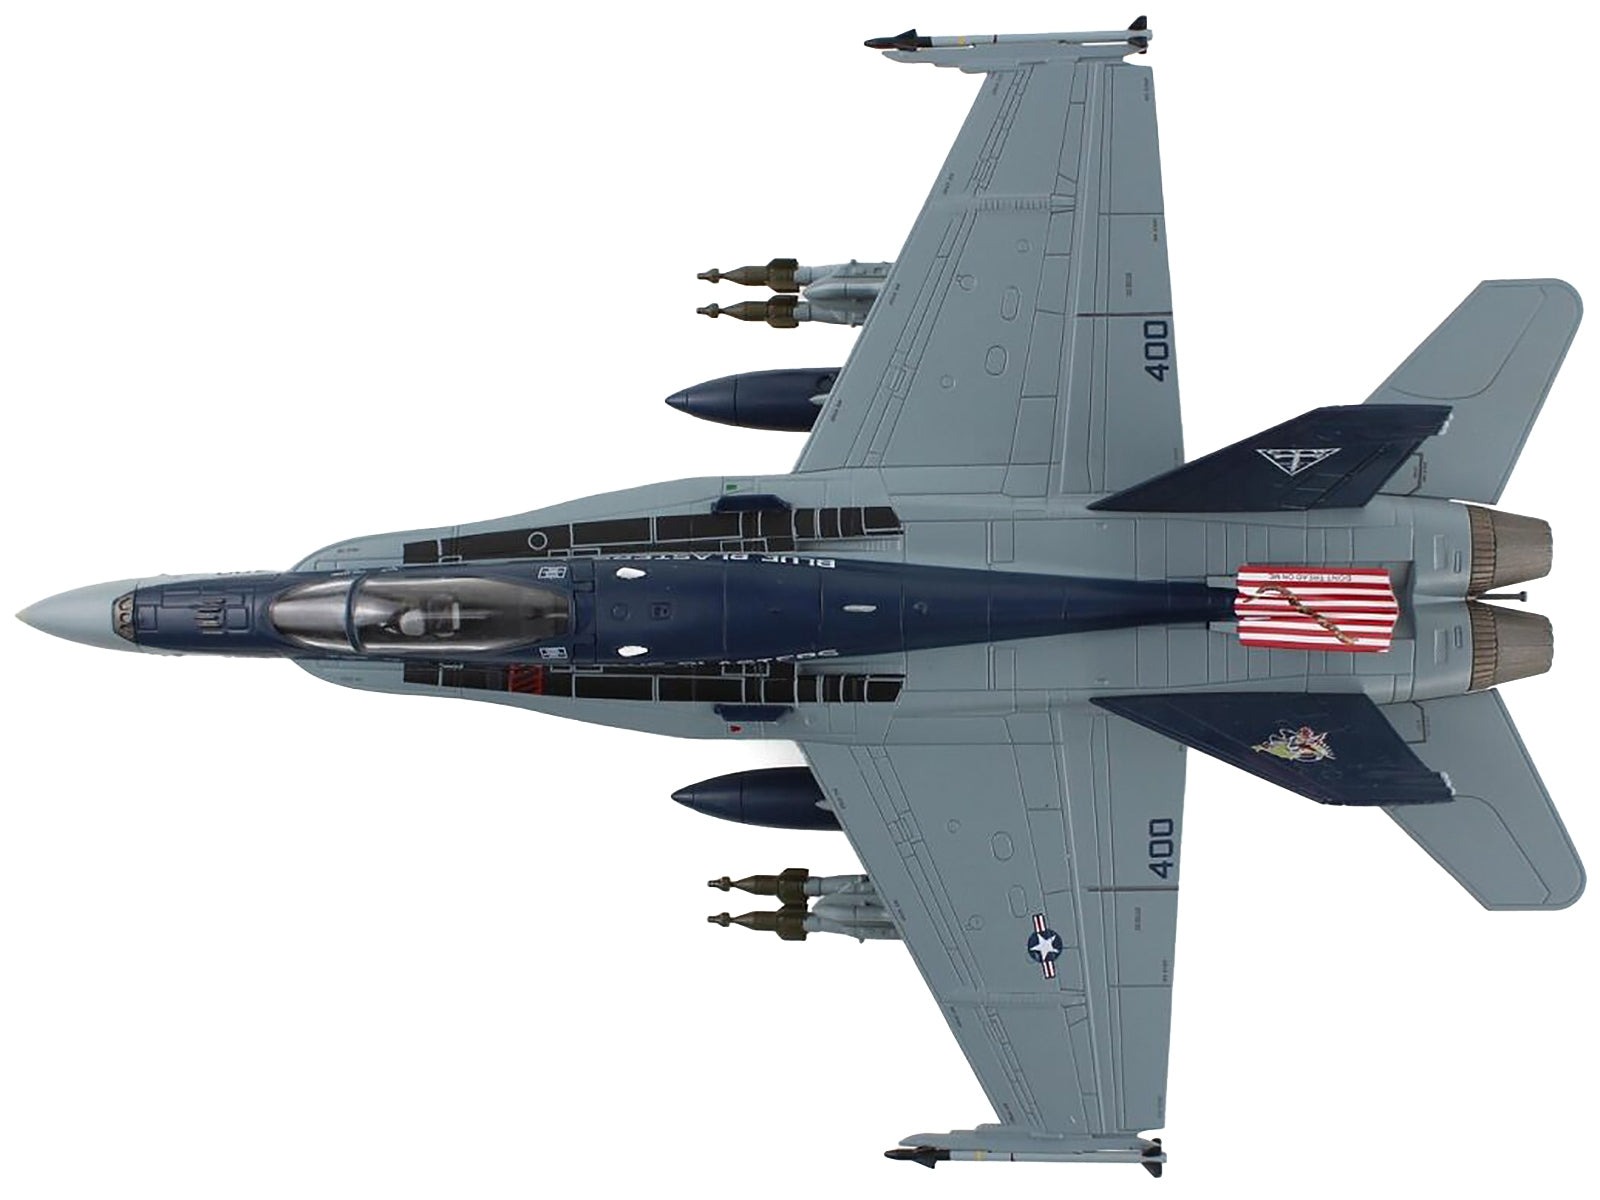 McDonnell Douglas F/A-18C Hornet Aircraft "NE400 VFA-34 Blue Blasters" (2015) United States Navy "Air Power Series" 1/72 Diecast Model by Hobby Master Hobby Master